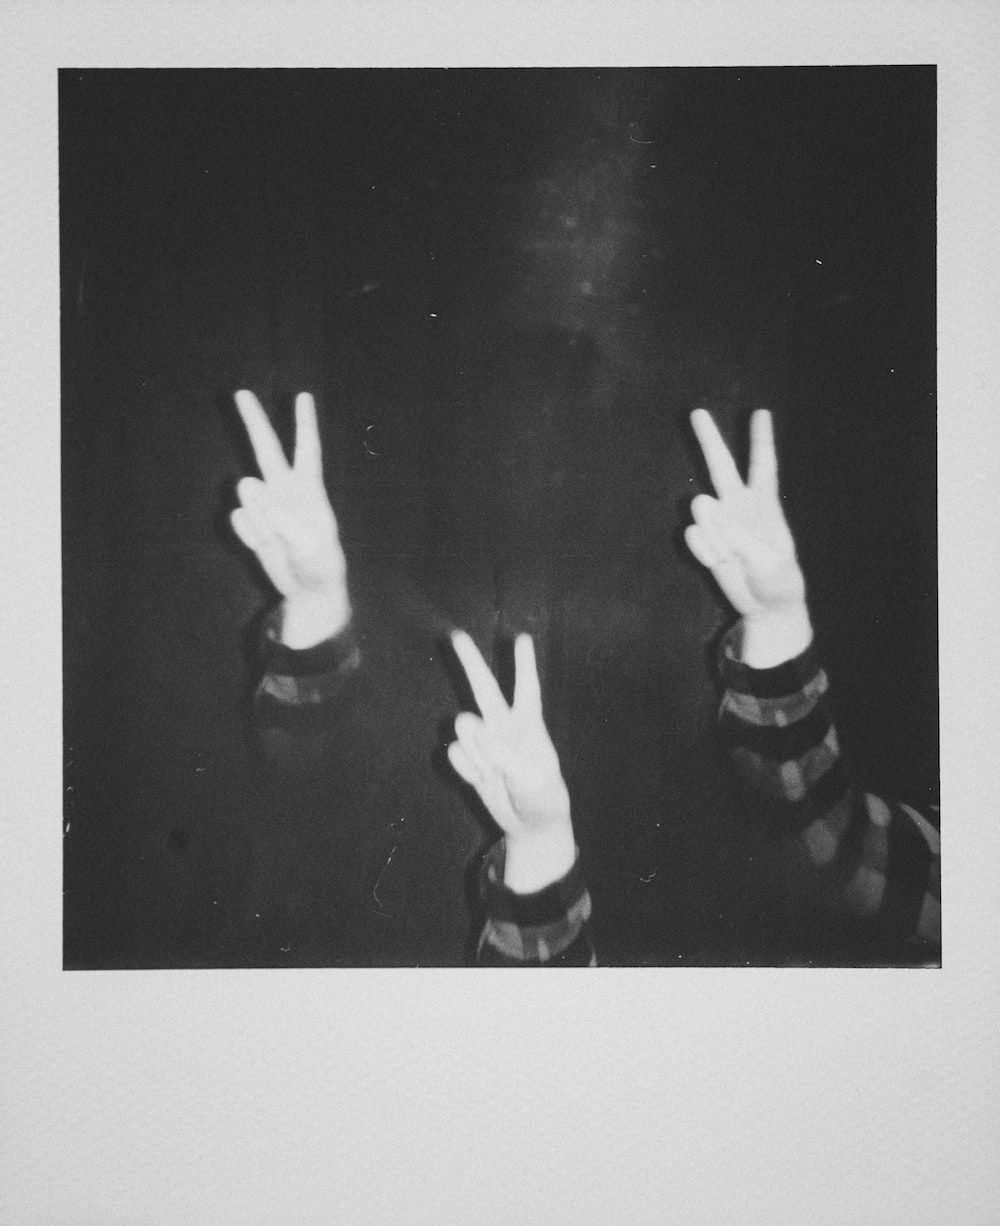 A black and white photograph of two hands making the peace sign - 90s